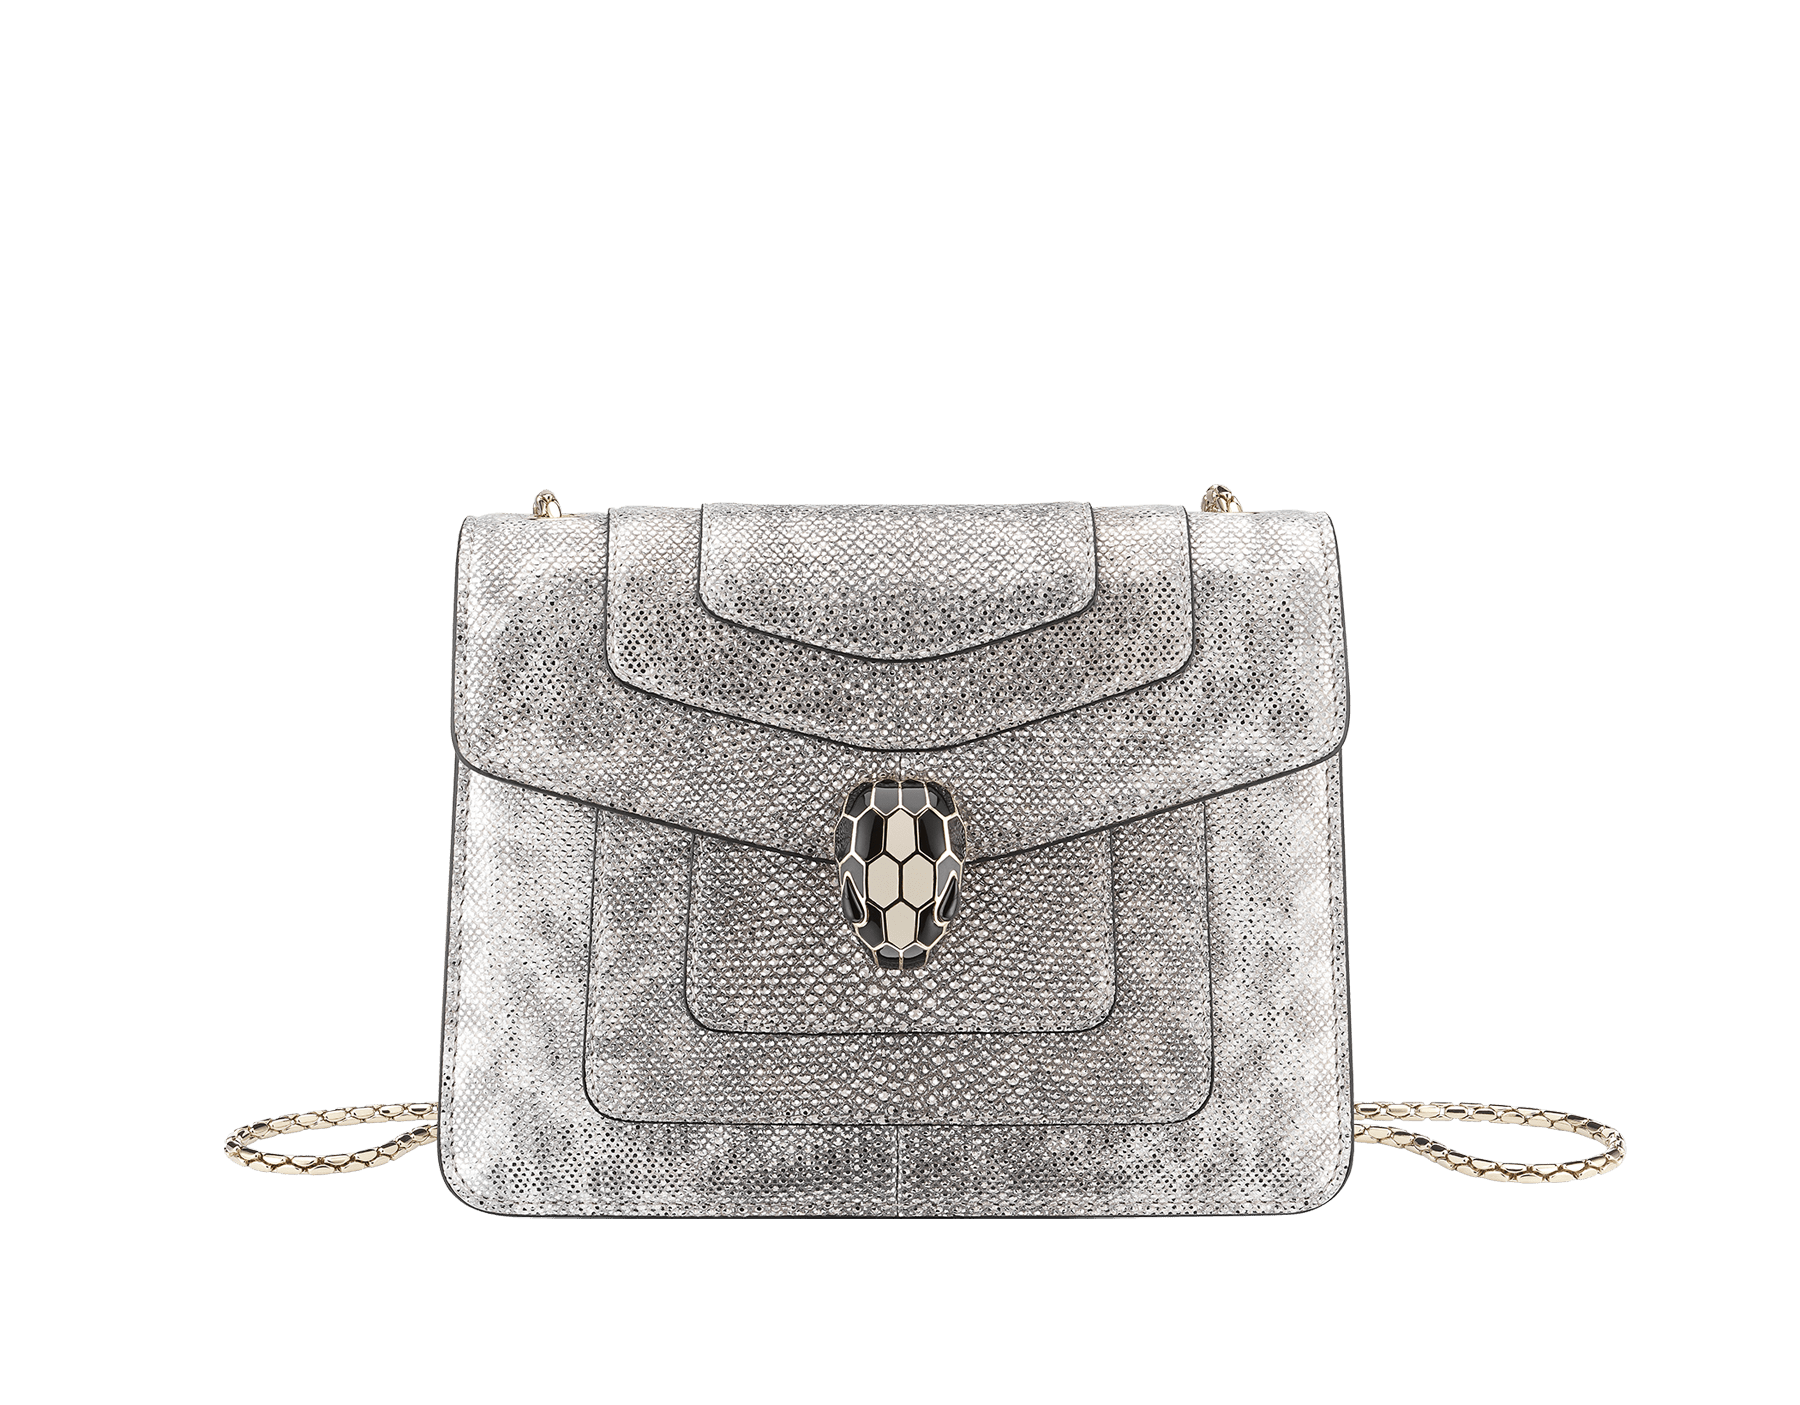 Serpenti Forever small crossbody bag in milky opal beige metallic karung skin with milky opal beige nappa leather lining. Captivating snakehead closure in light gold-plated brass embellished with black and glitter milky opal beige enamel scales and black onyx eyes. 422-MK image 1